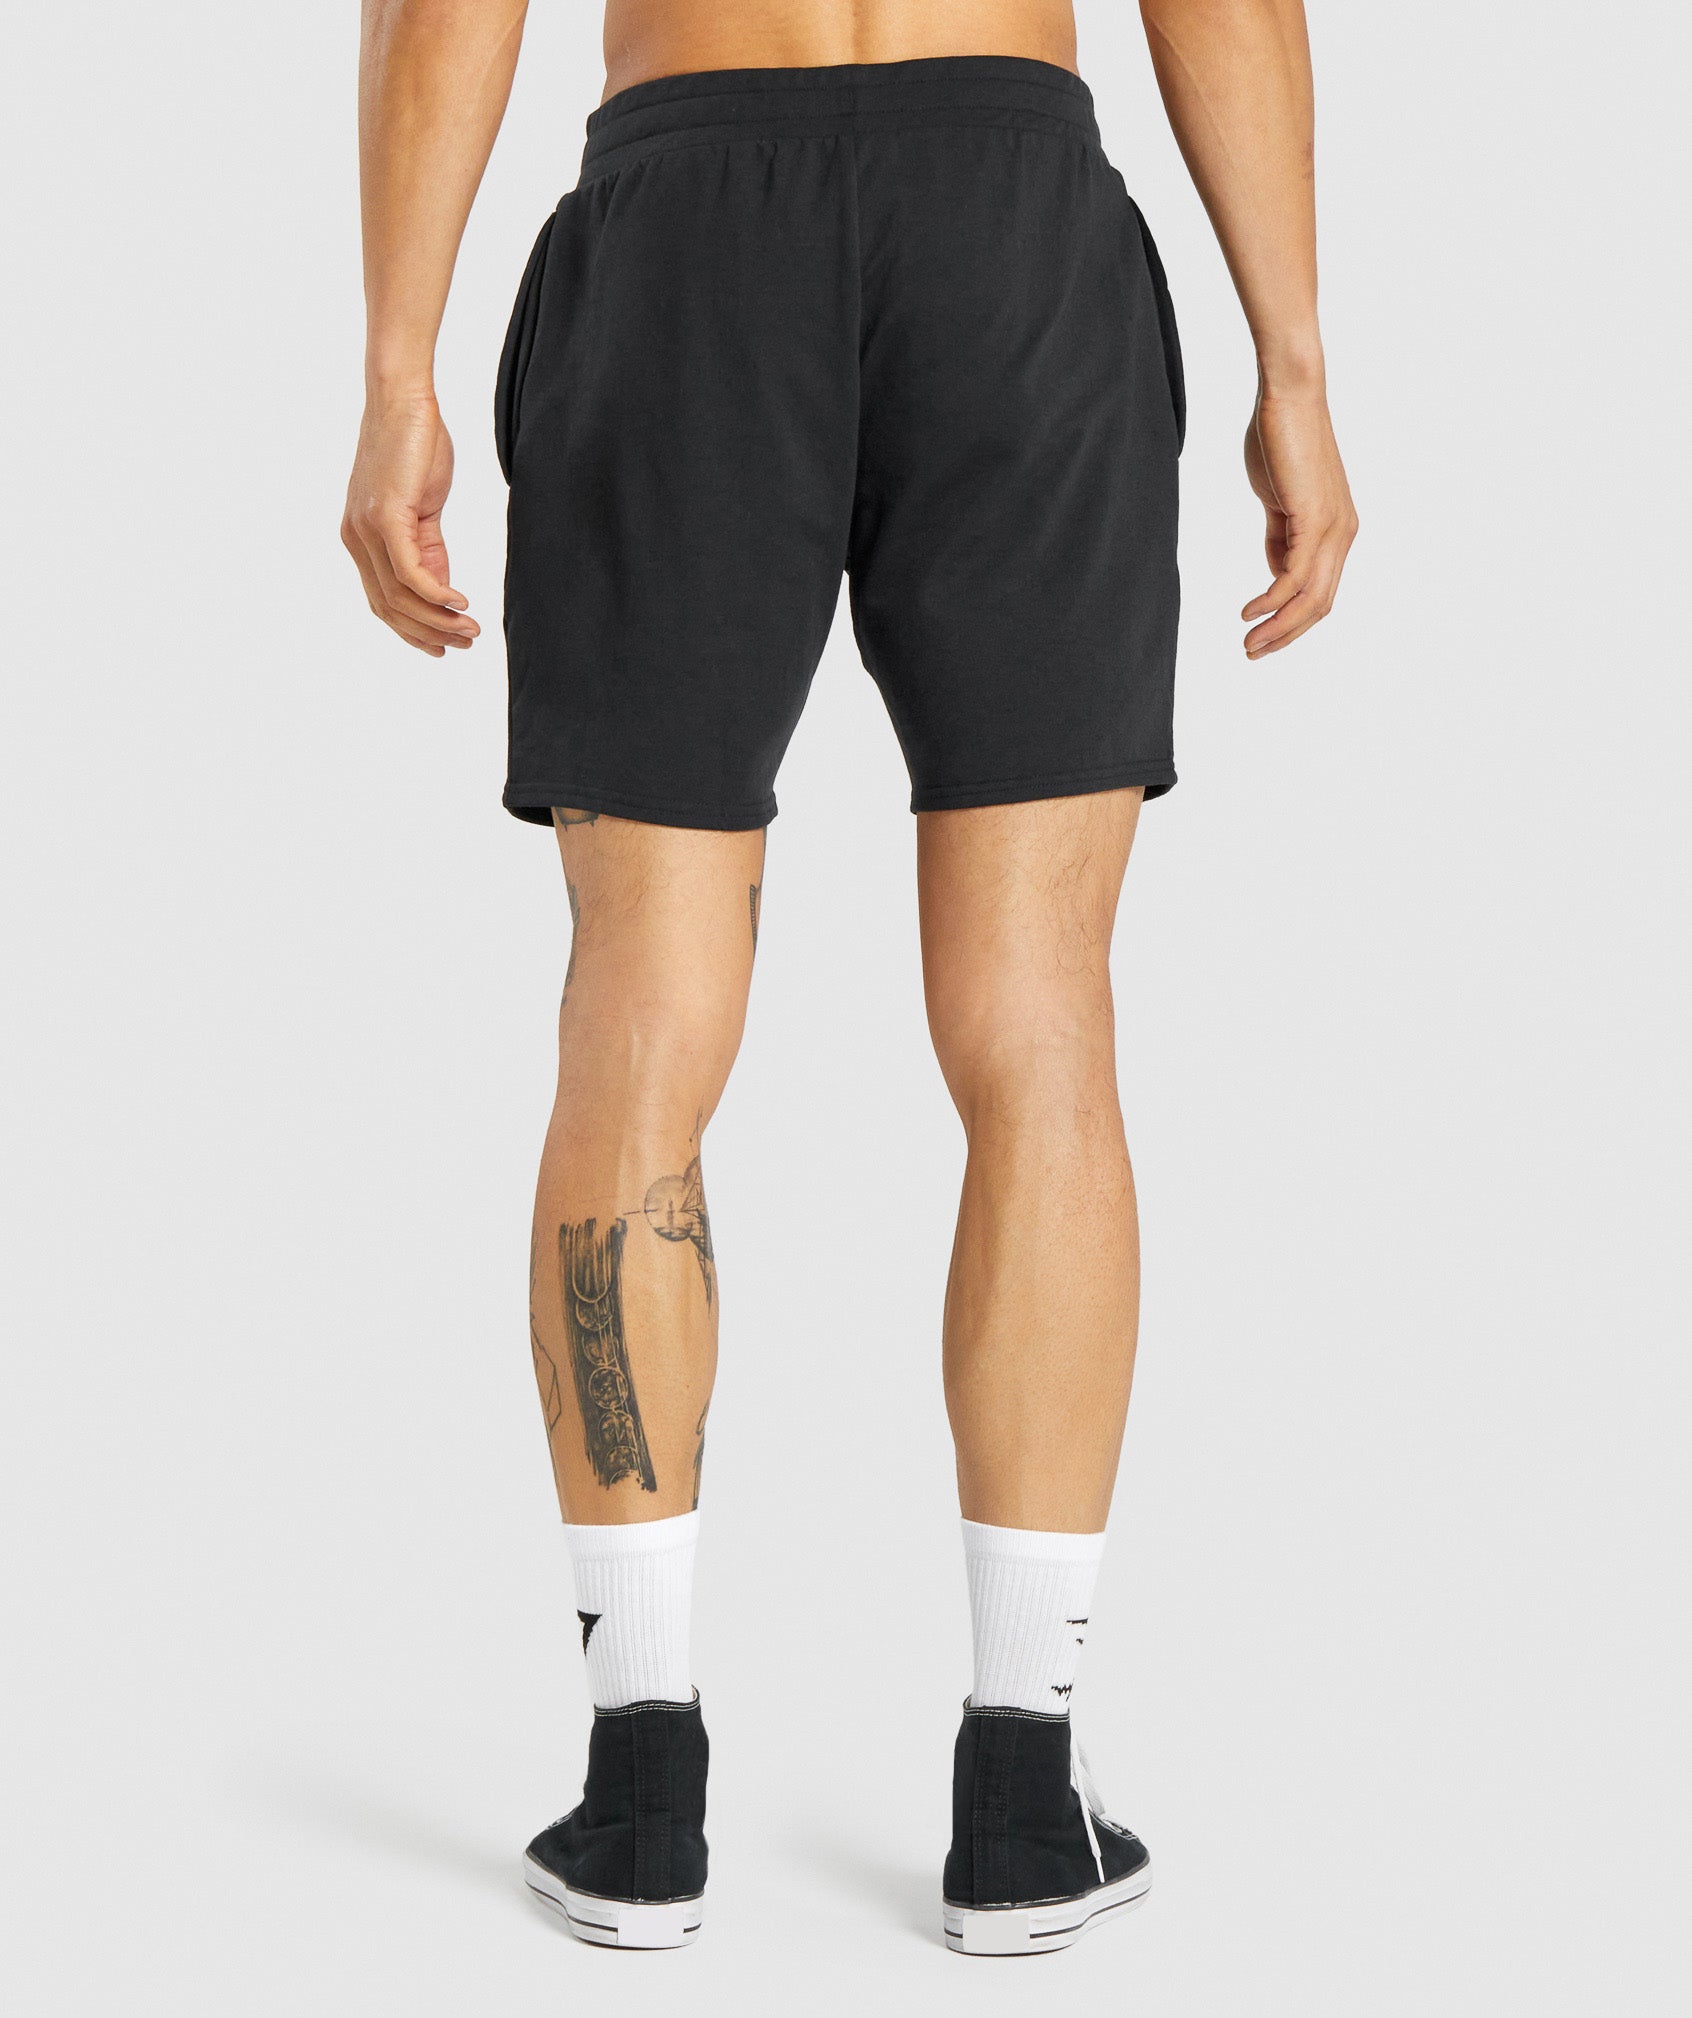 Essential 7" Shorts in Black - view 2